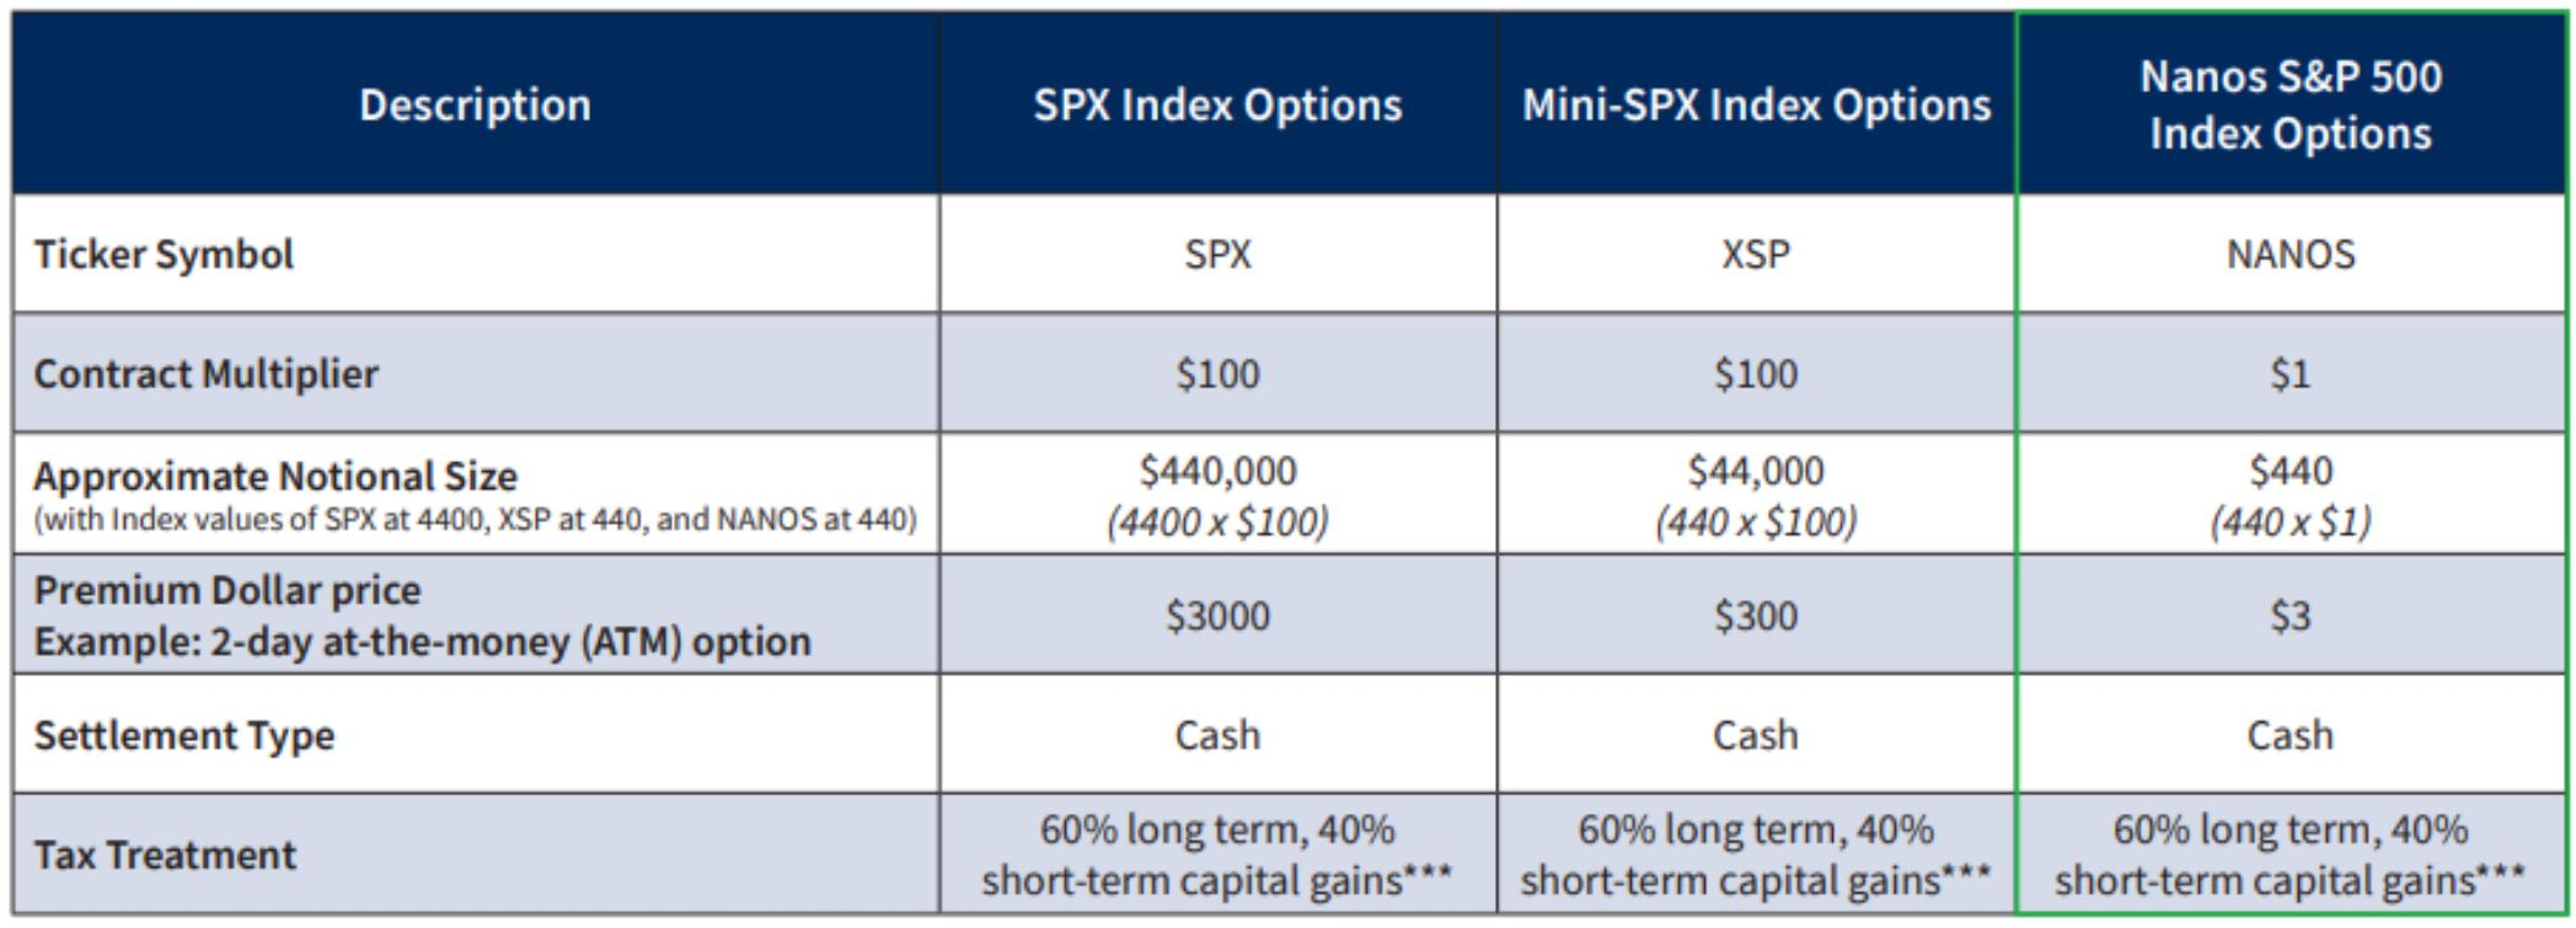 An Option For Every Trader? — Diving Into Cboe’s SPX, XSP And Nano